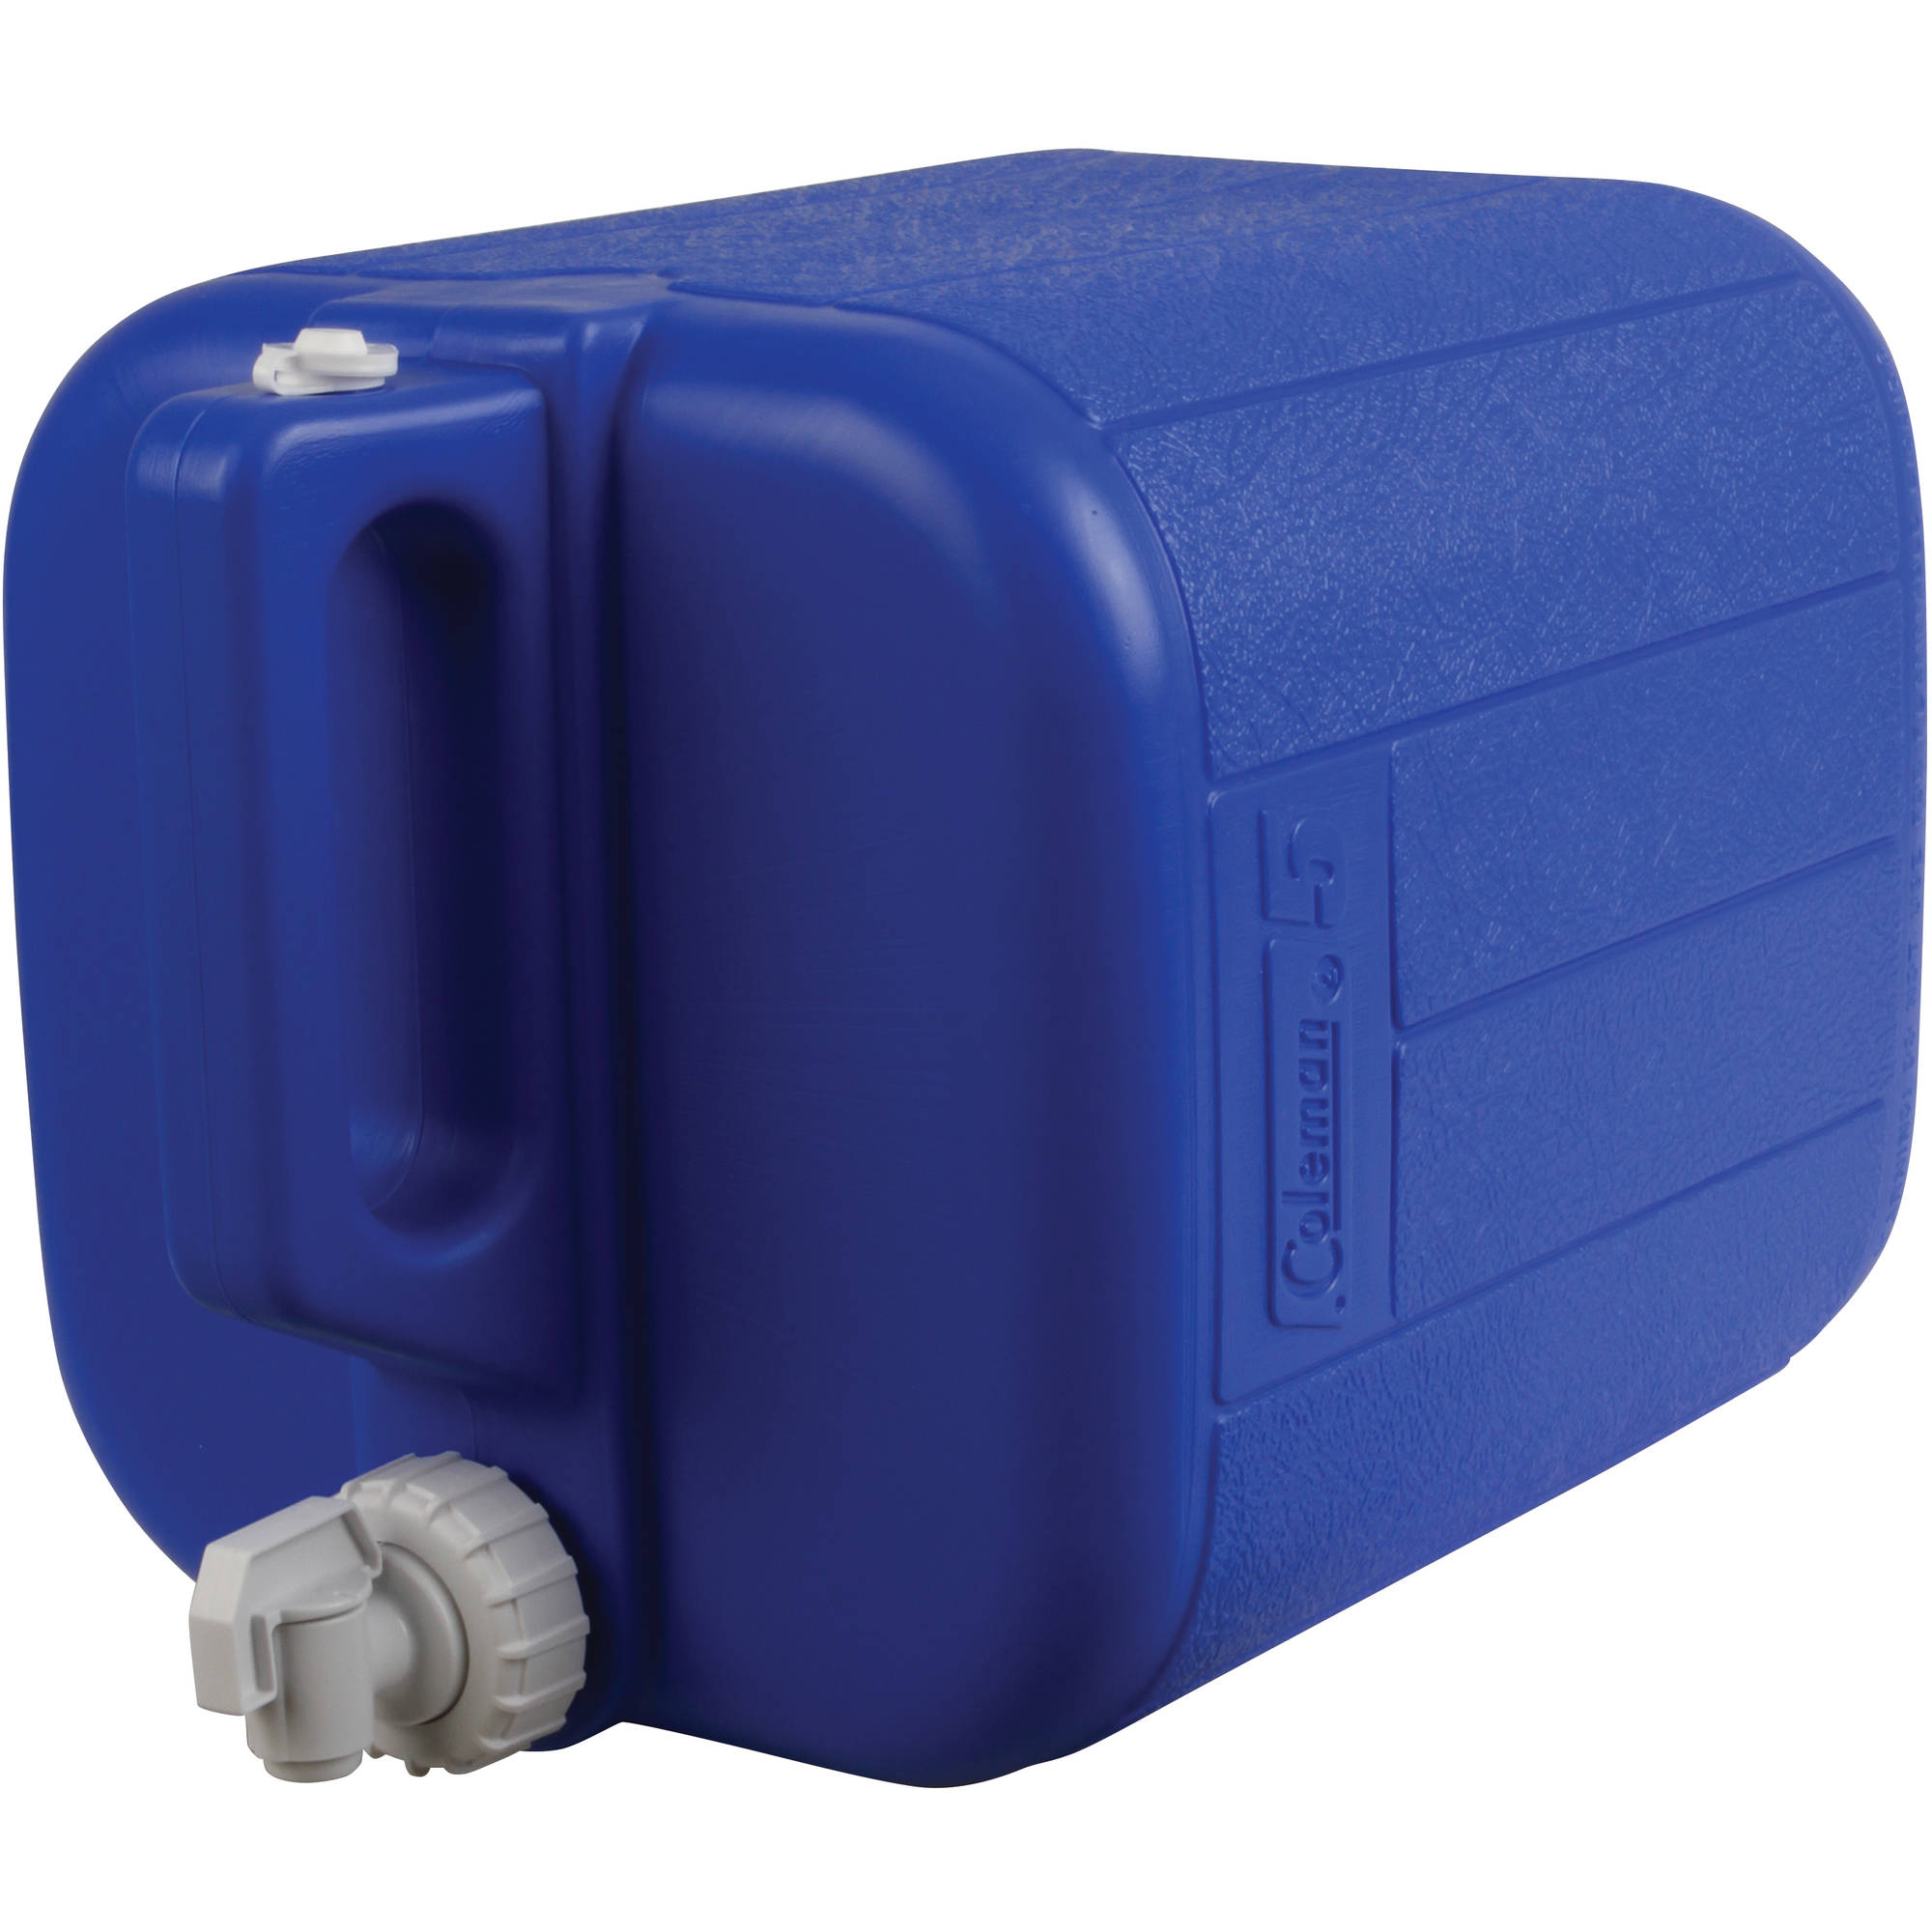 Coleman 5-Gallon Water Carrier, Blue - image 3 of 5